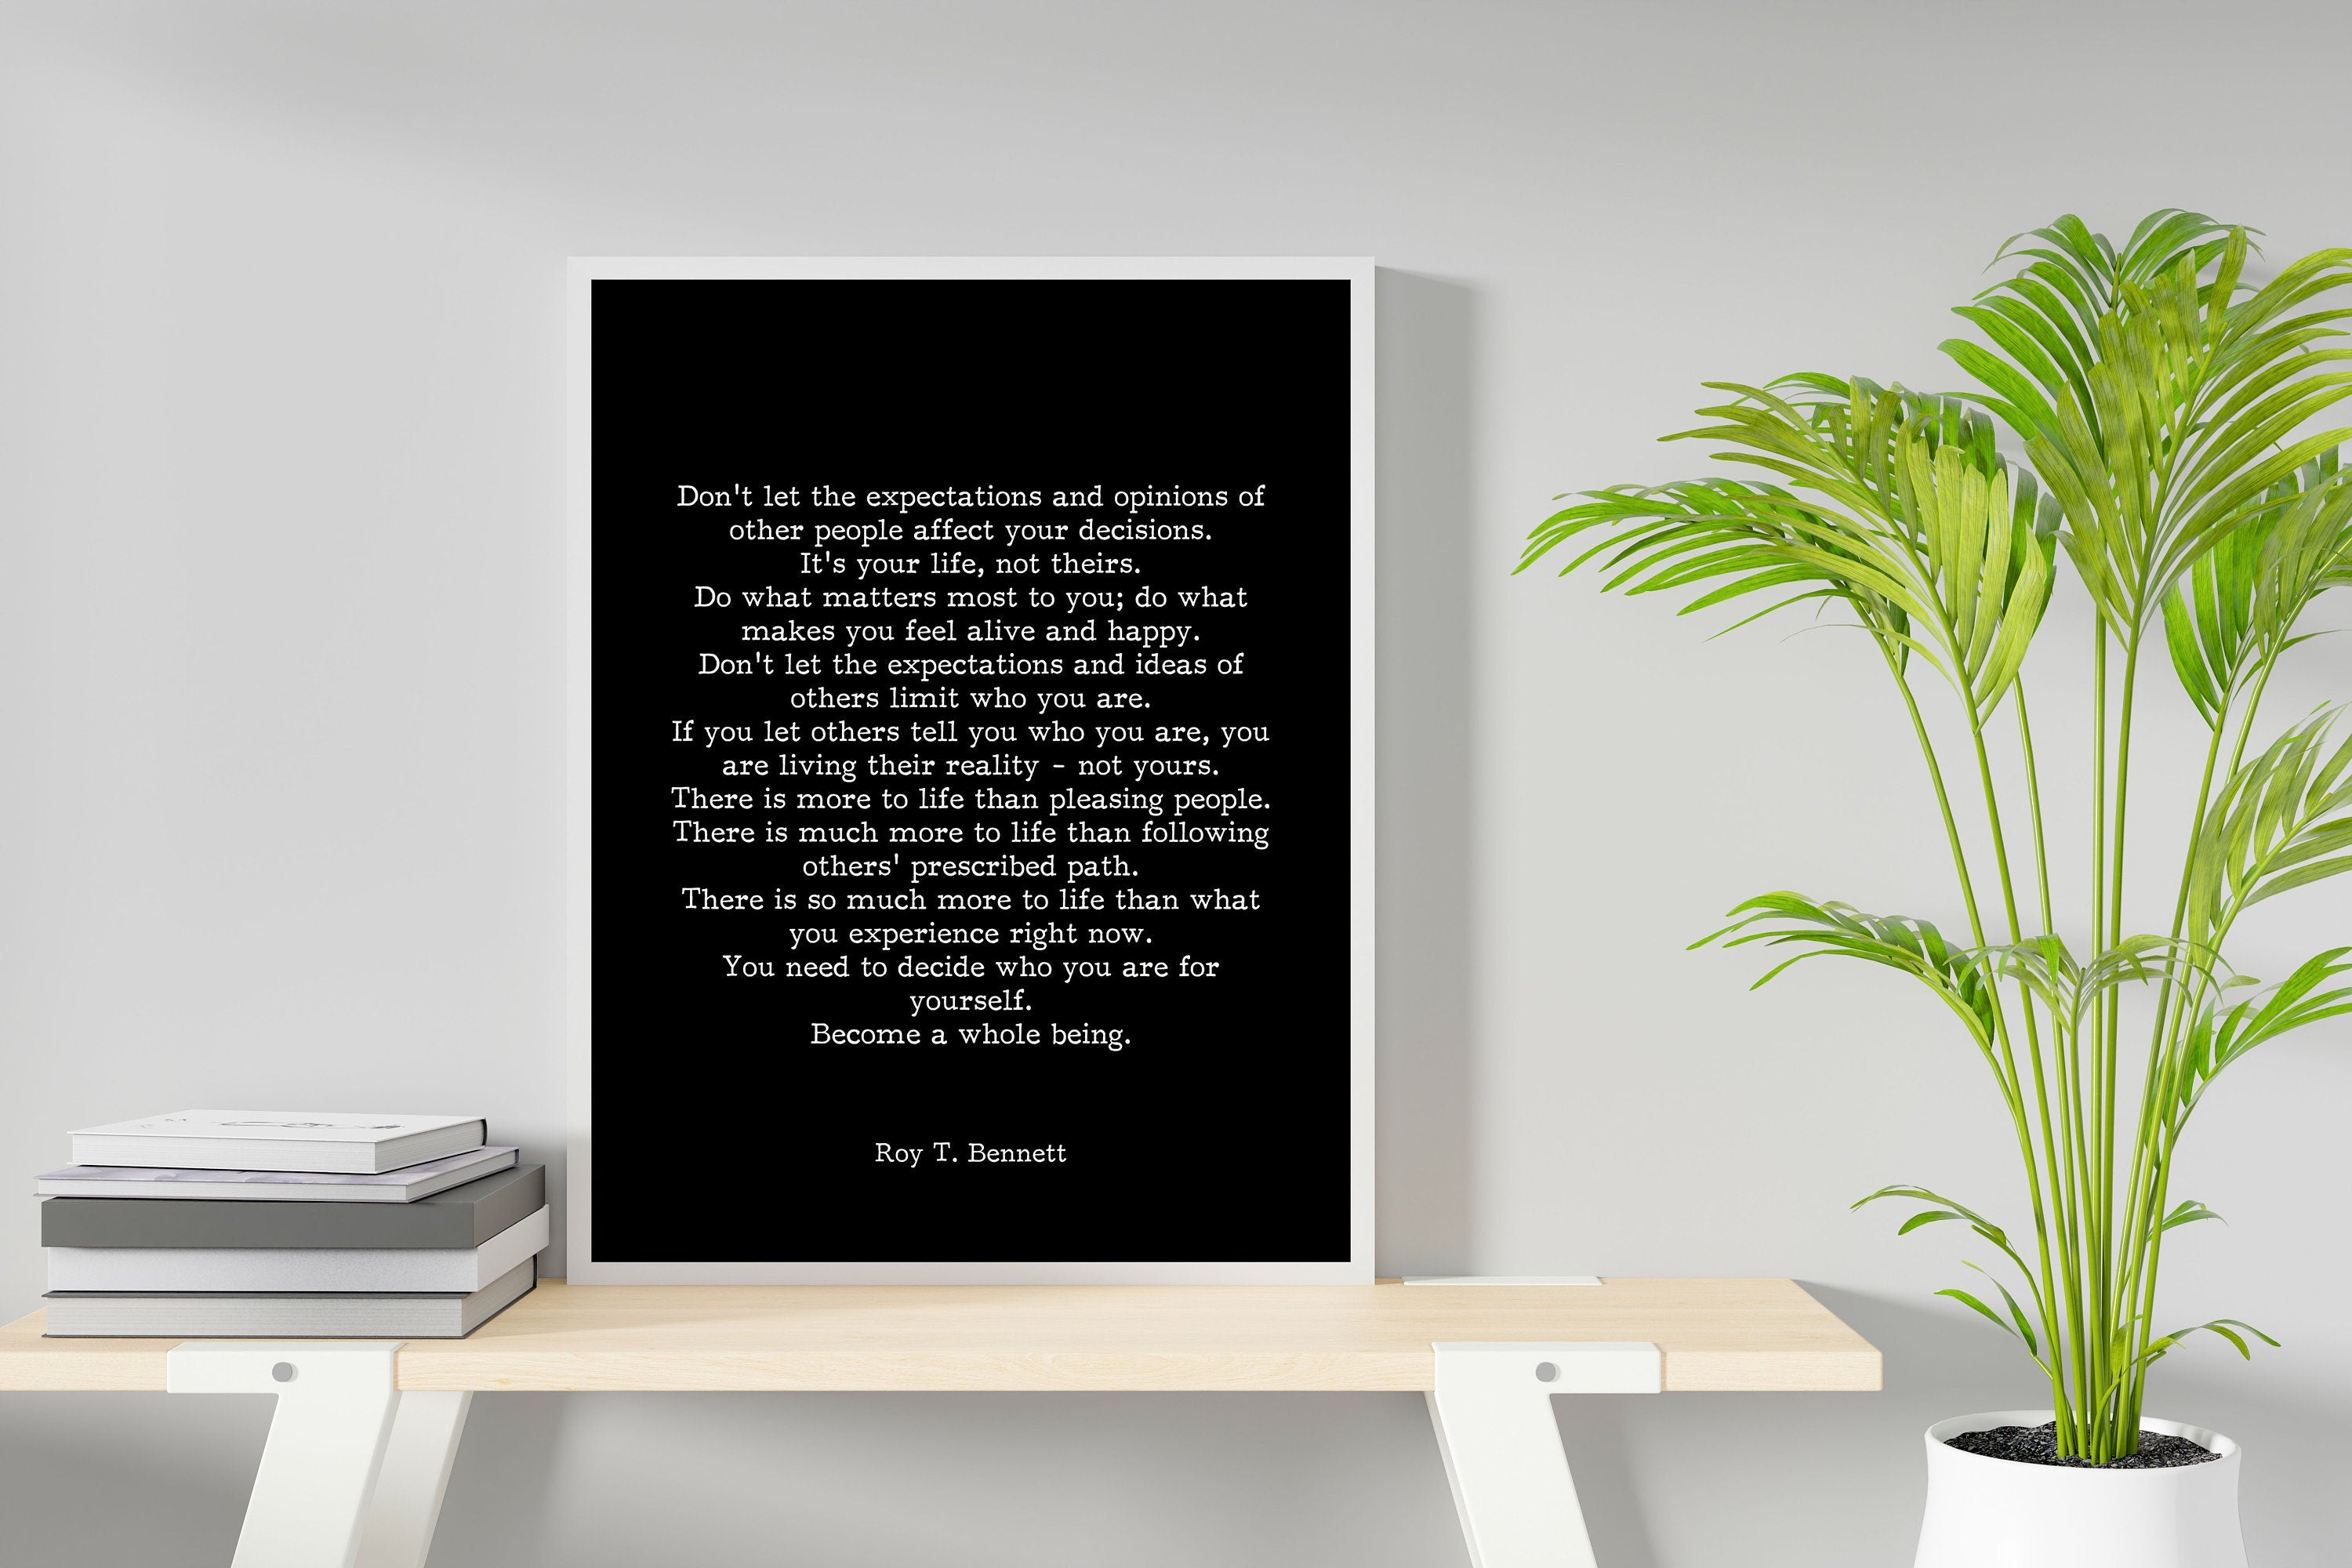 Roy T Bennett Inspirational Quotes Literary Art Print, Become a Whole Being Poster in Black & White and Vintage, Framed or Unframed Art